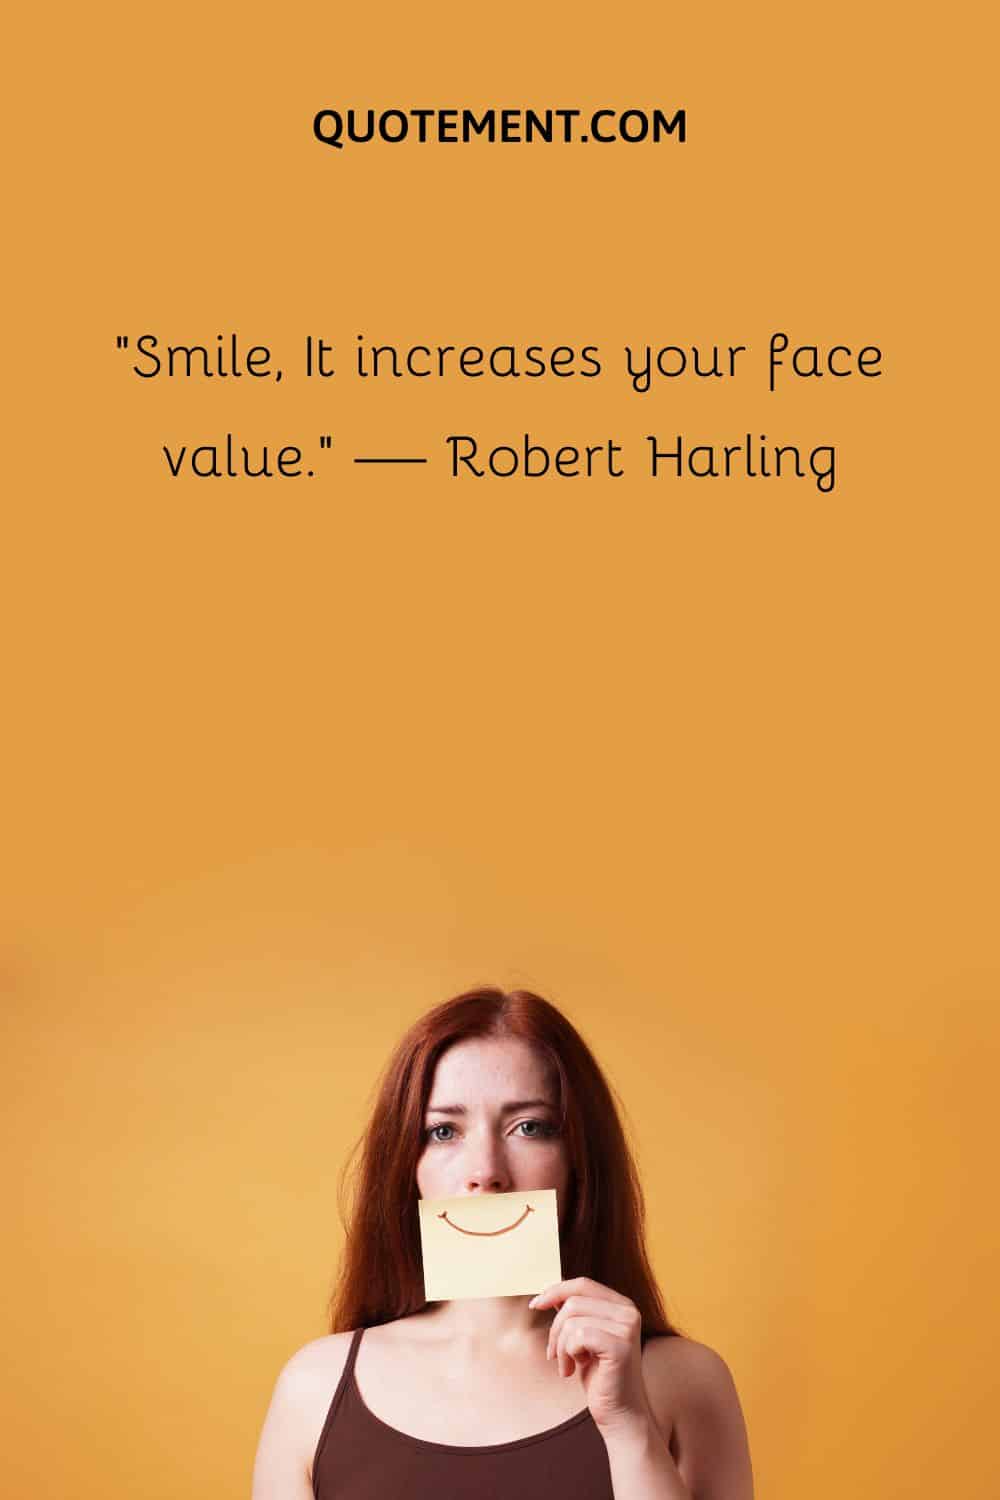 Smile, It increases your face value